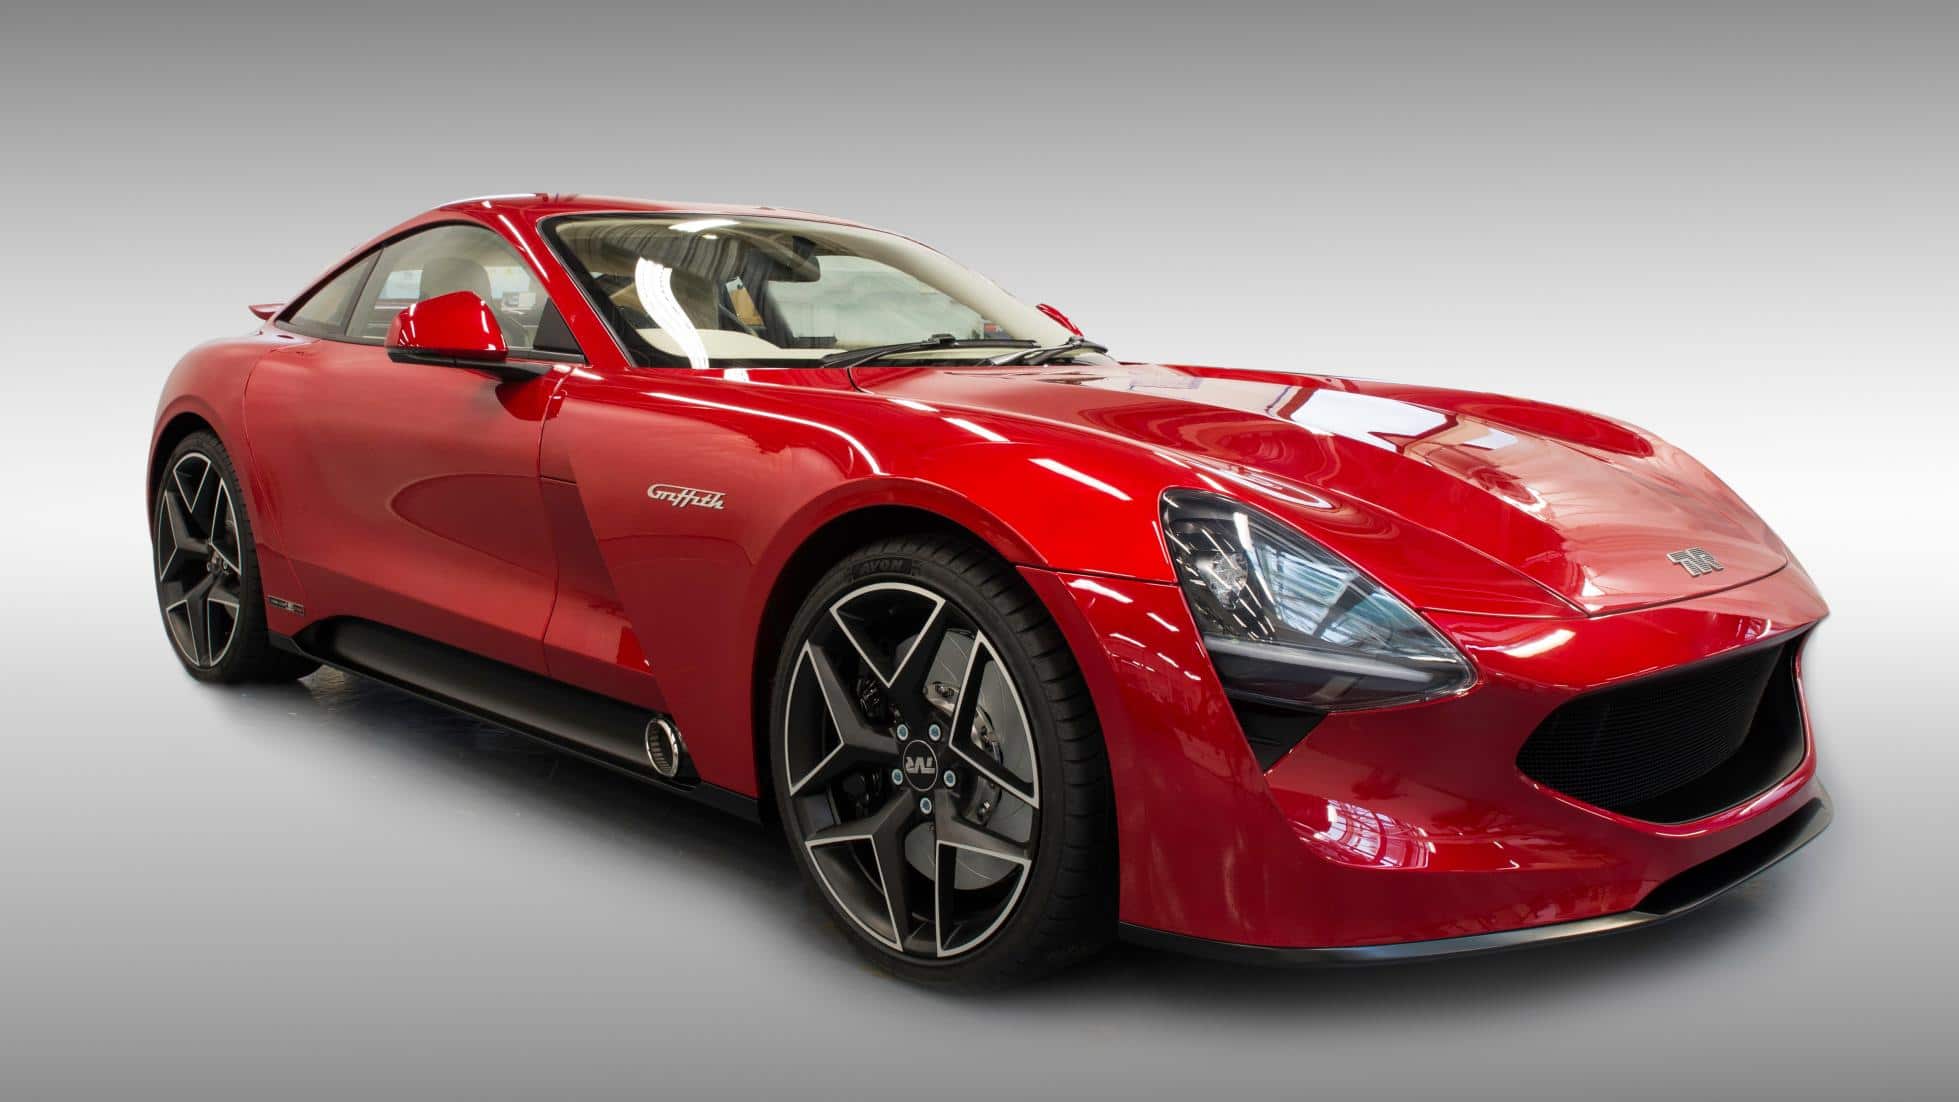 TVR Griffith V8 2019